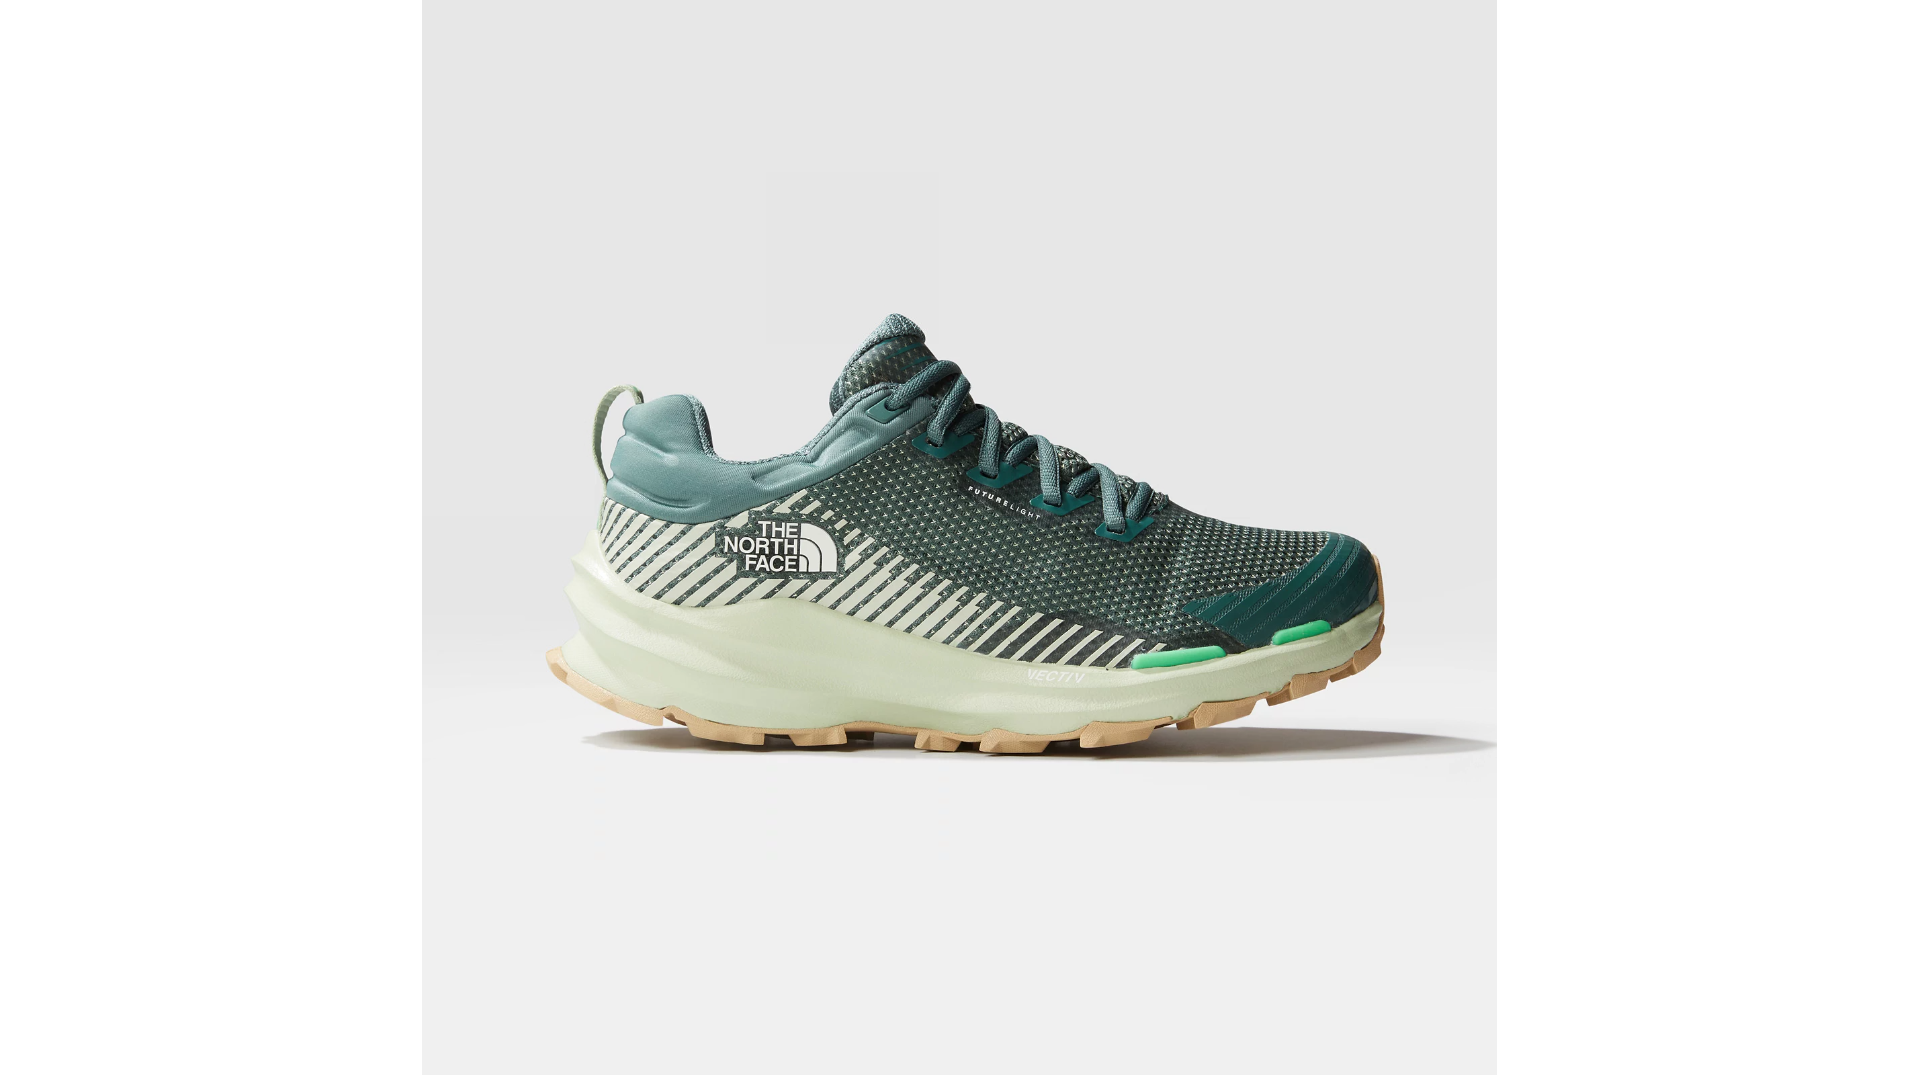 The North Face Womens Vectiv Fastpack Futurelight  Shoe